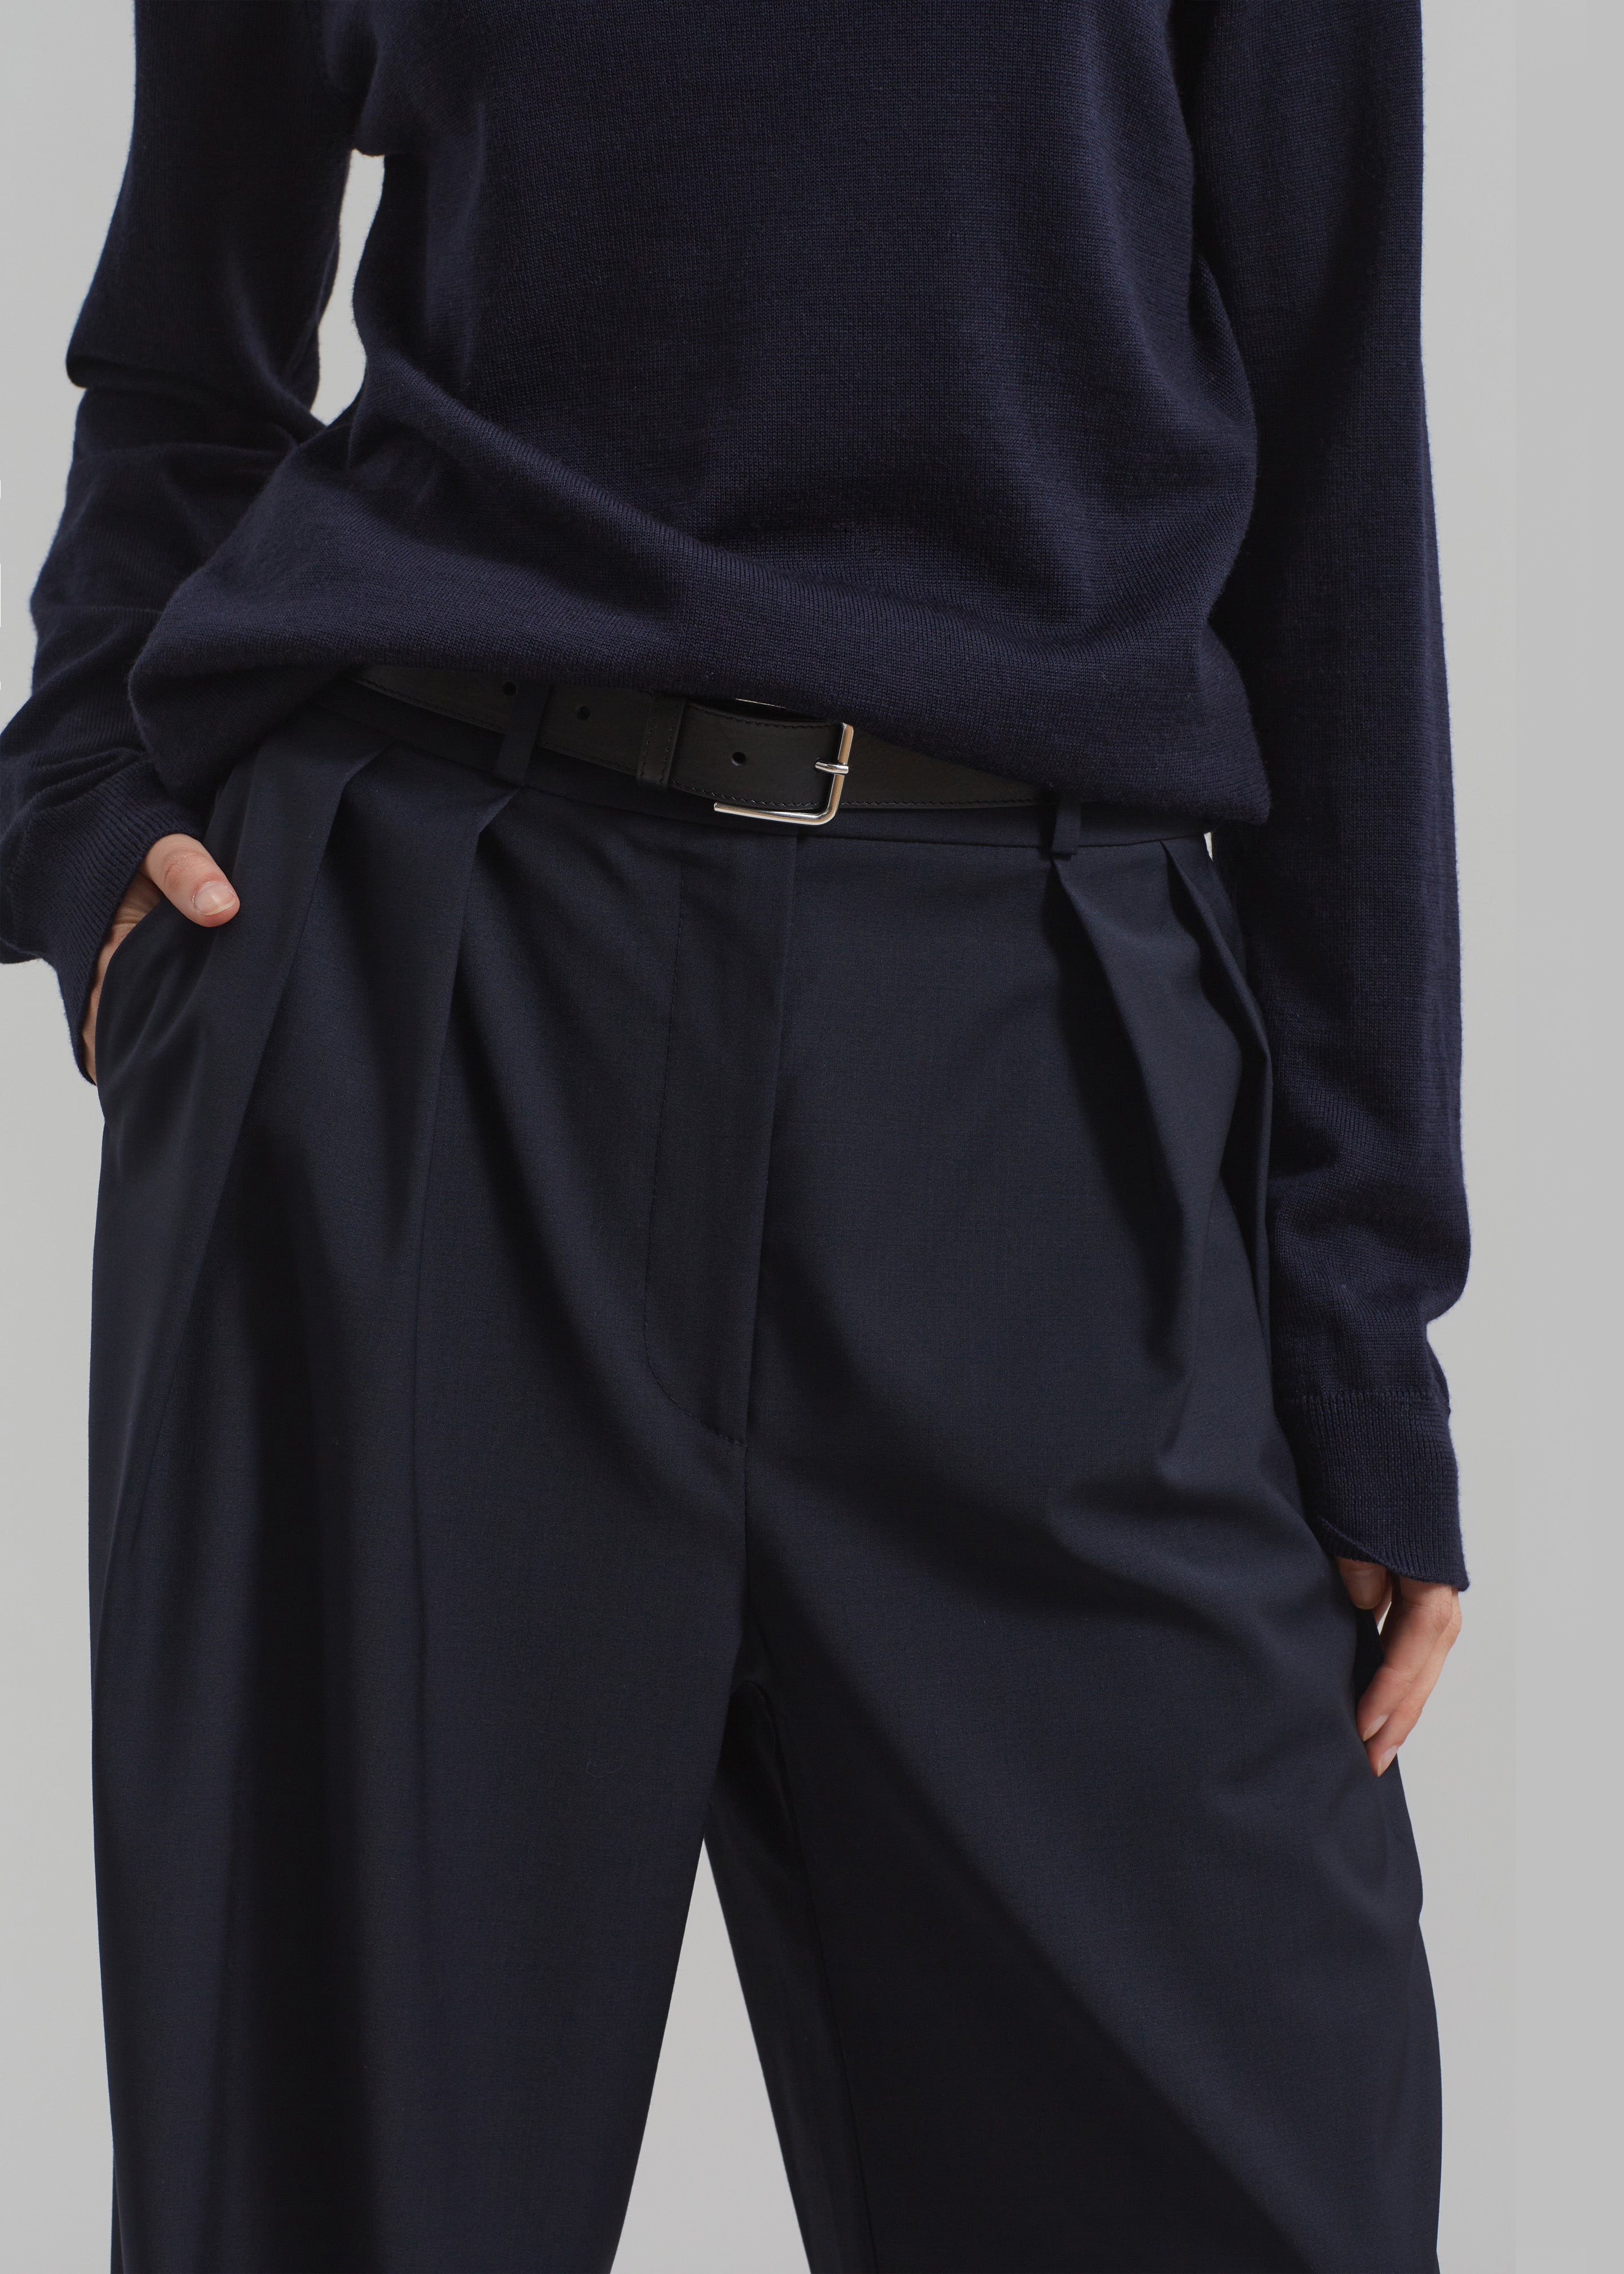 Ripley Pleated Trousers - Navy - 4